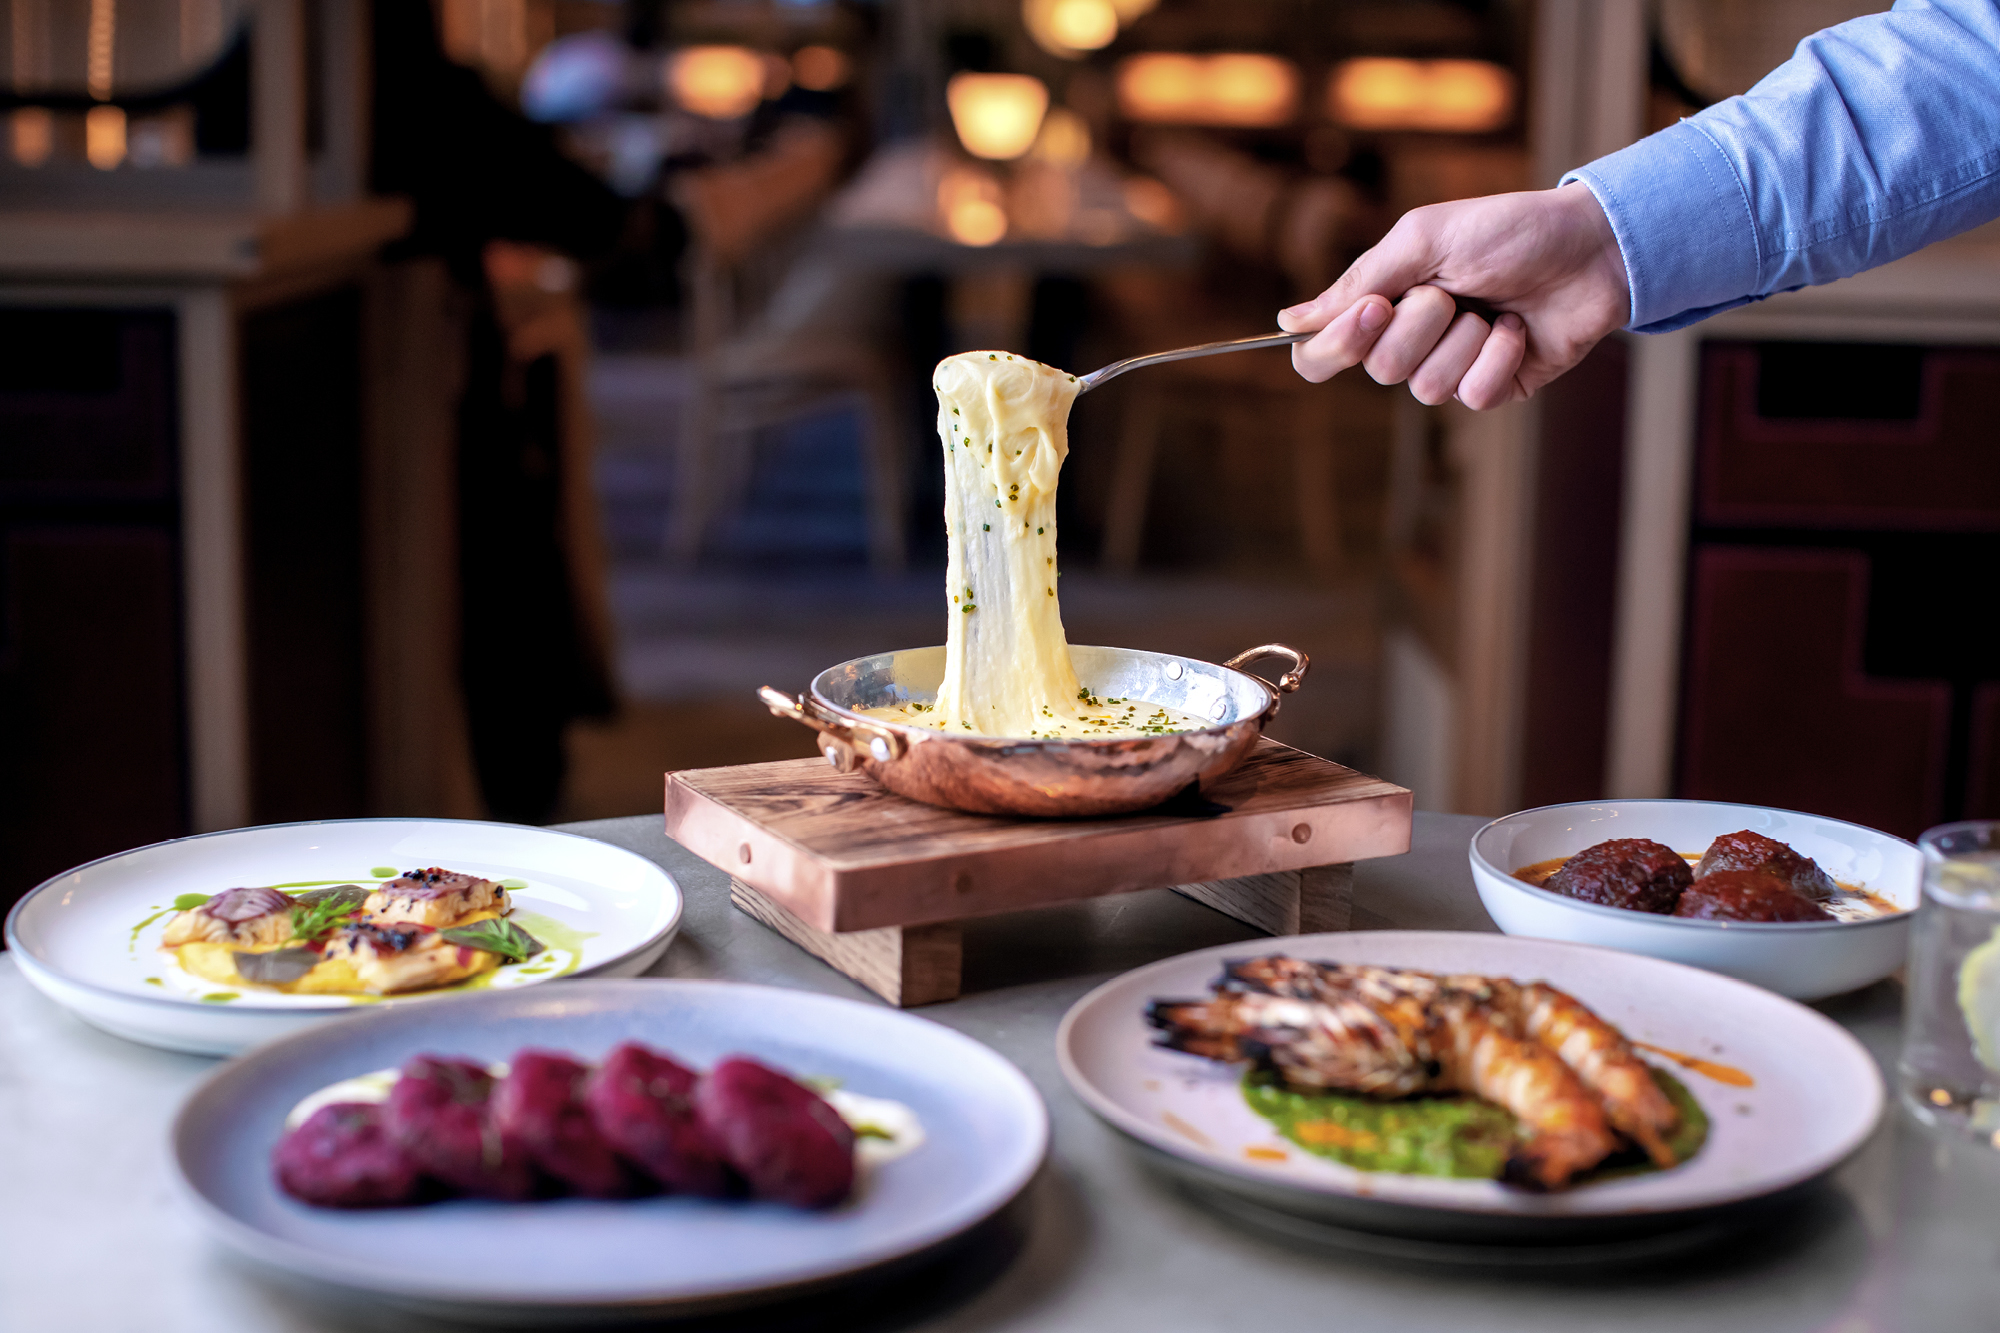 The menu at Barboun is full of nibbles, small plates, big plates and sides; perfect for sharing.